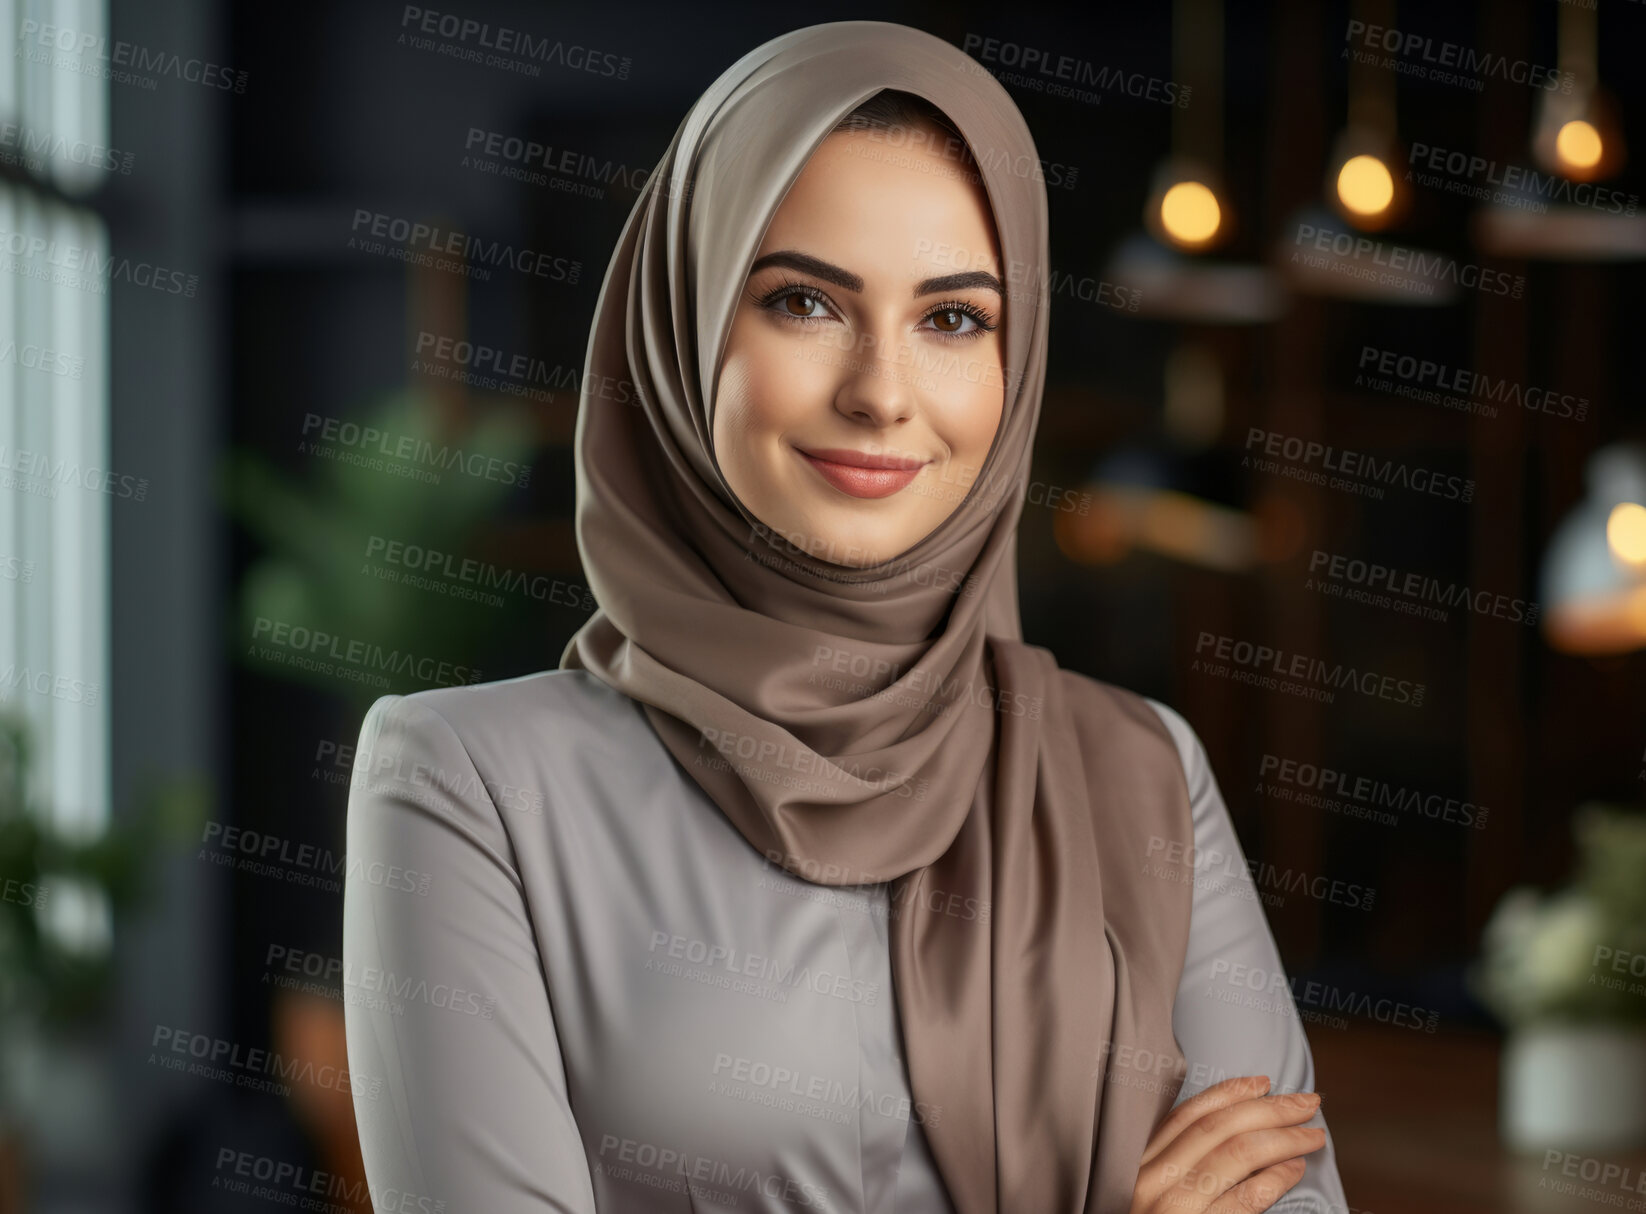 Buy stock photo Portrait of muslim woman posing arms folded. Wearing hijab. Religion concept.